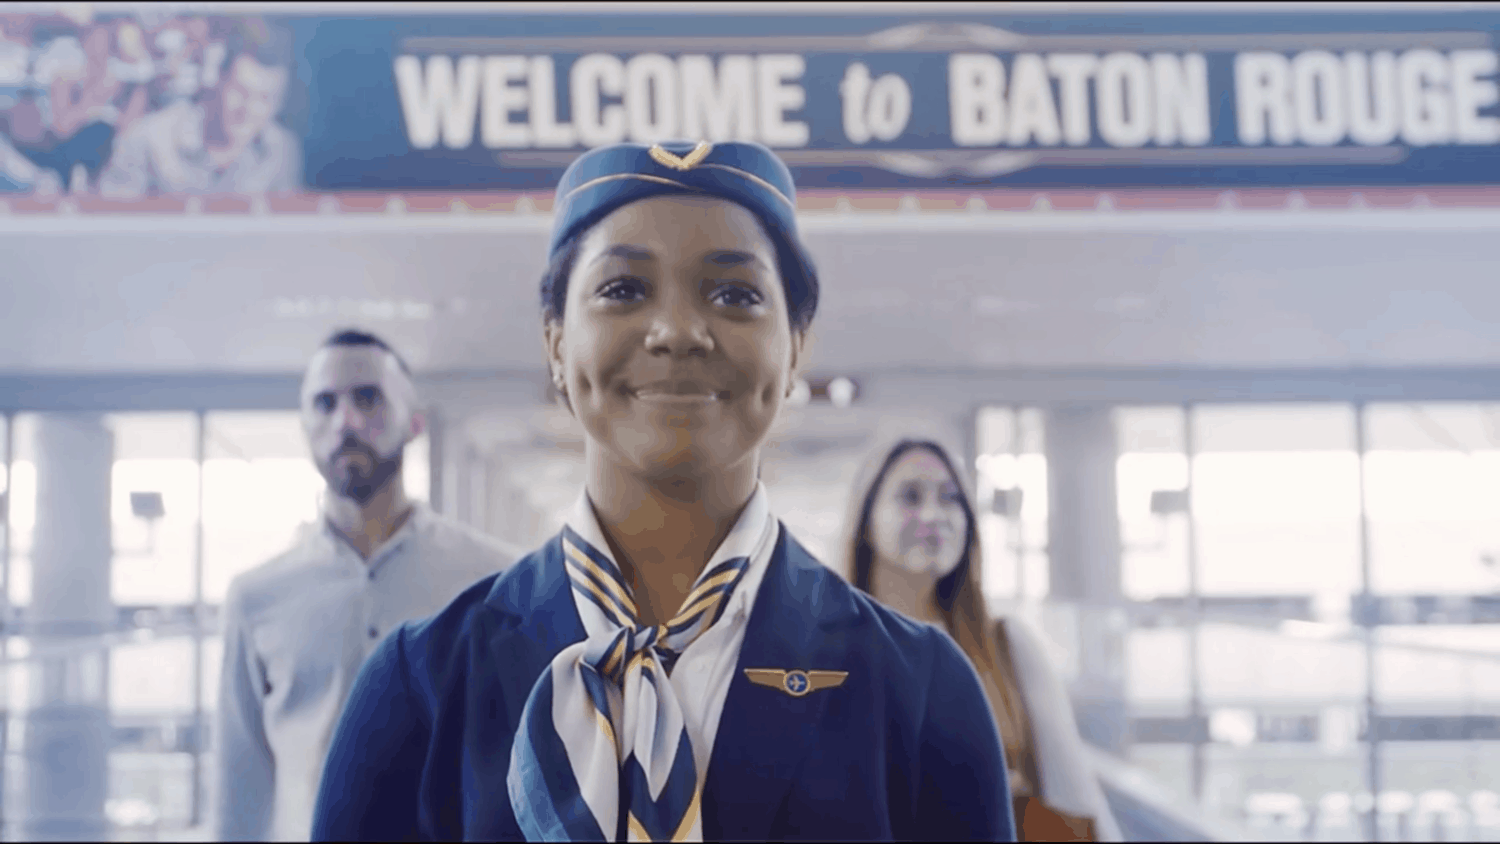 A flight attendant guides a couple through the Baton Rouge airport